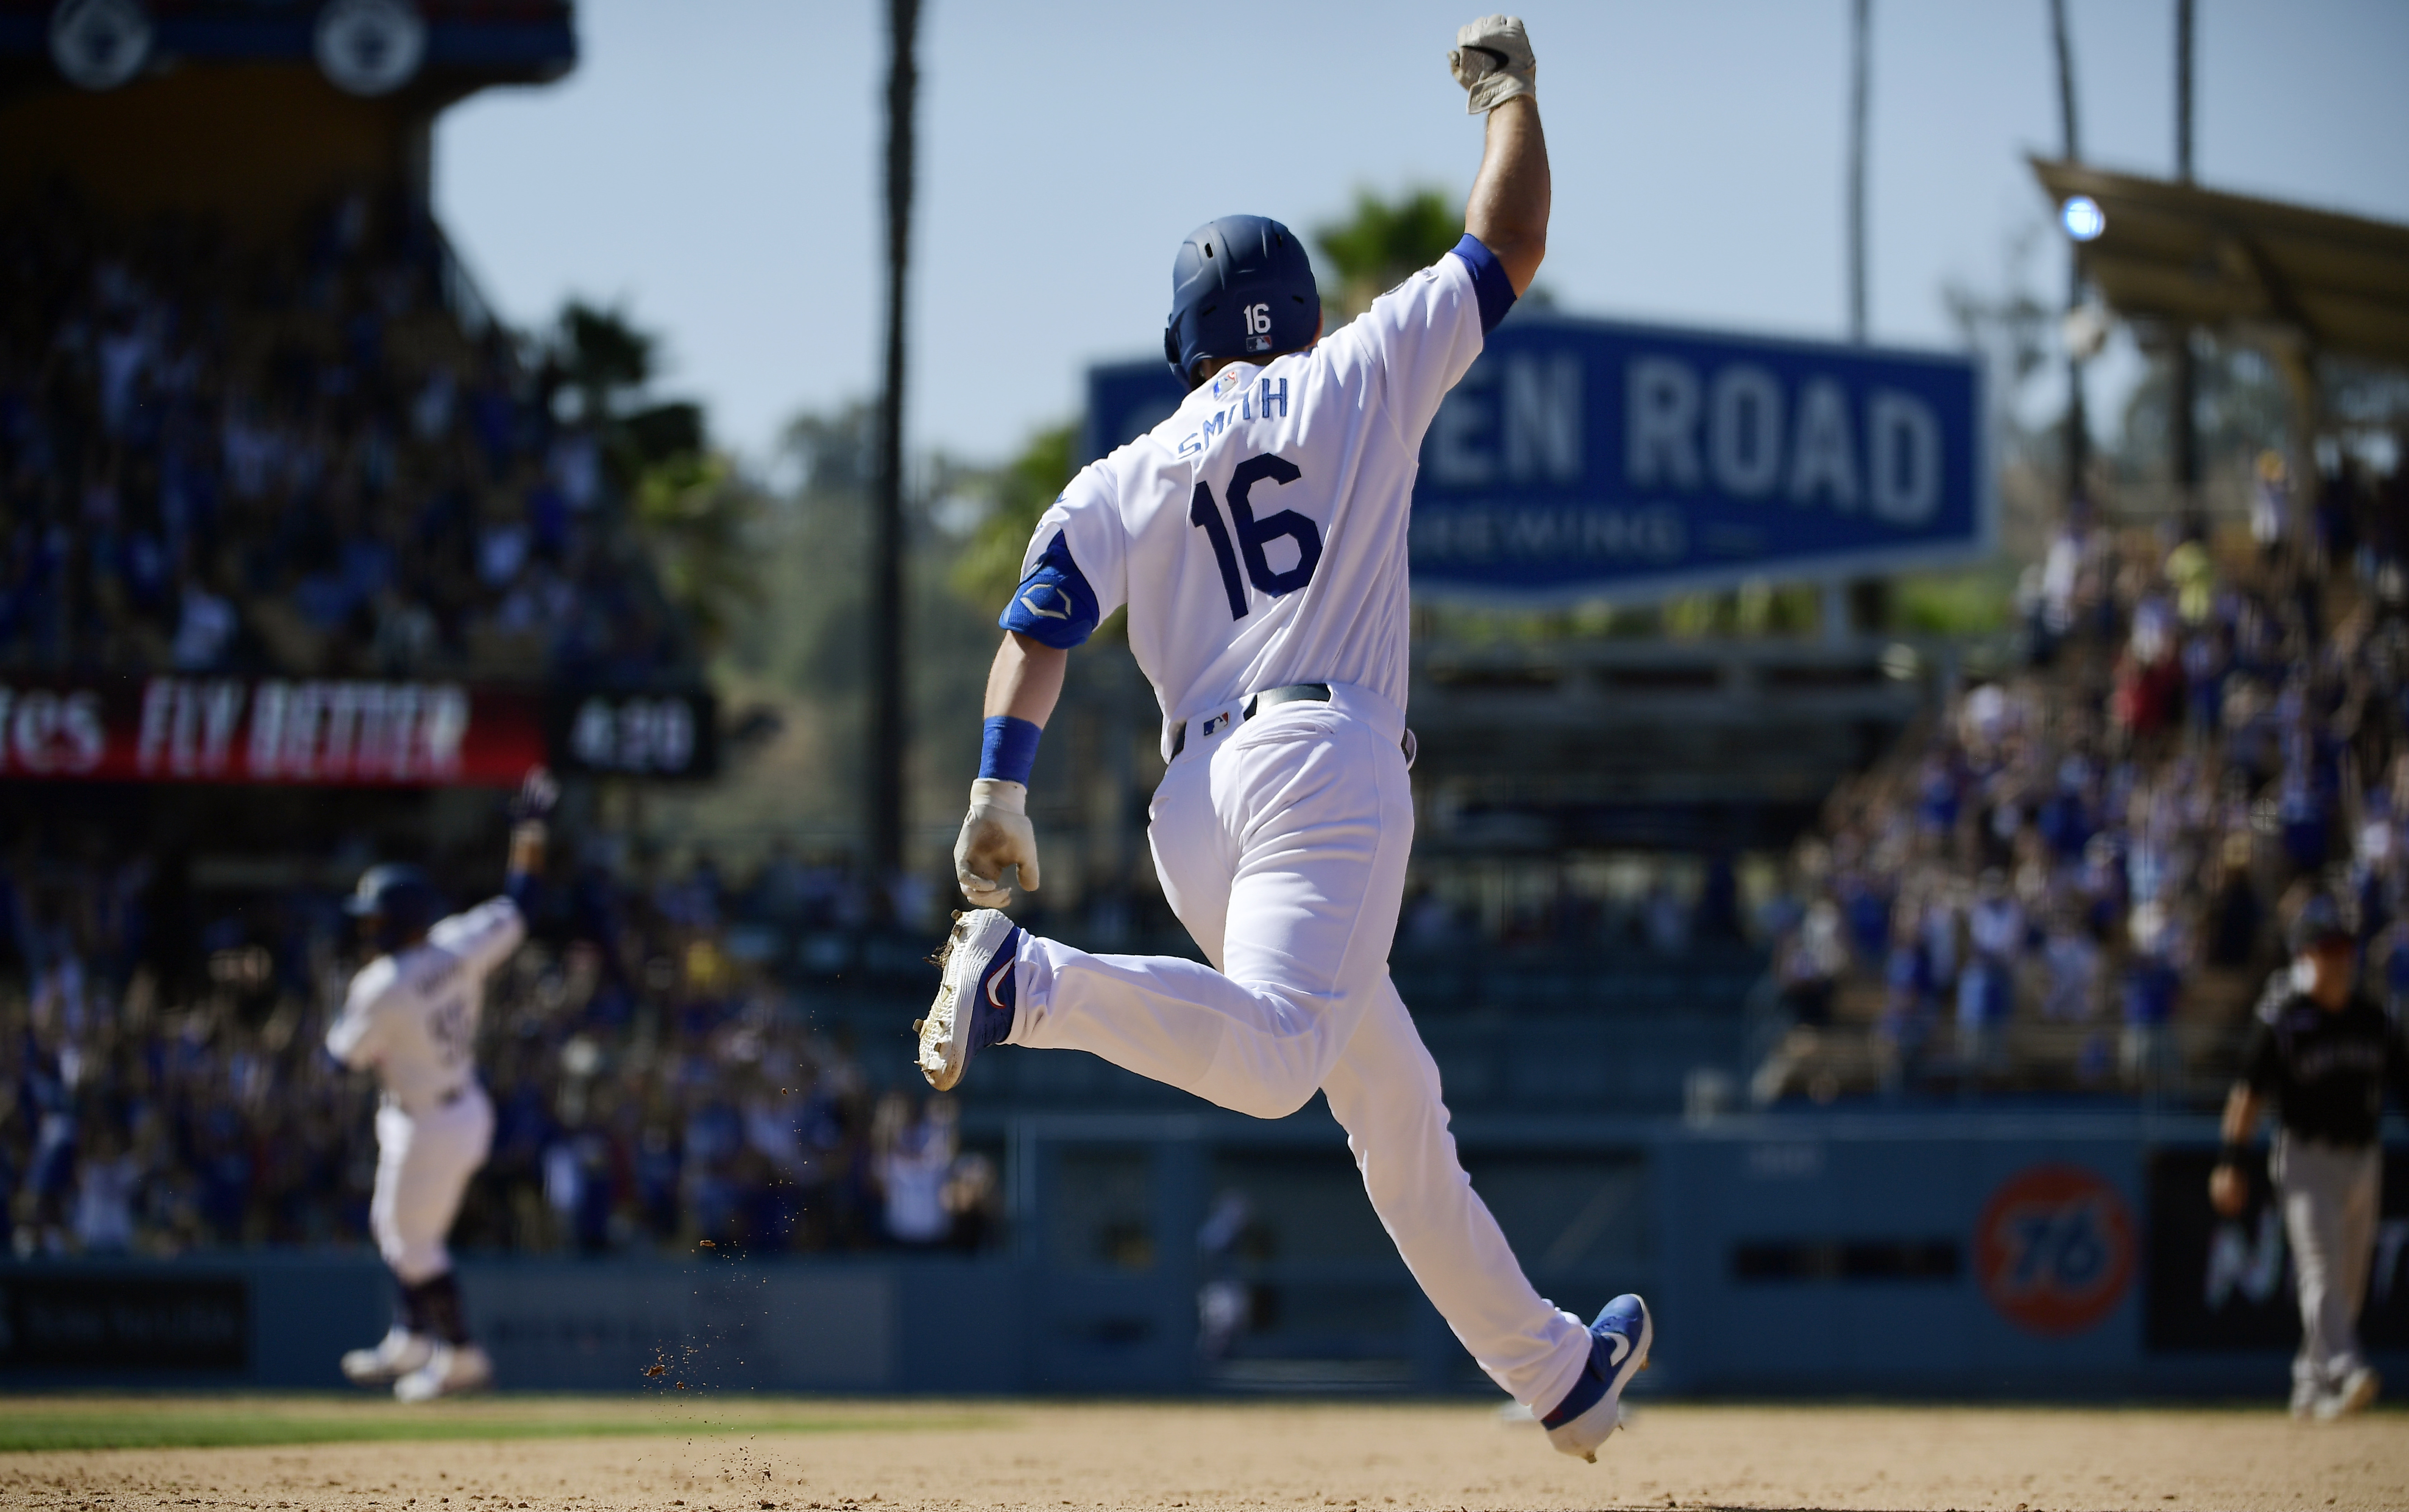 Rookie trifecta: Smith delivers 3rd straight walk-off for LA